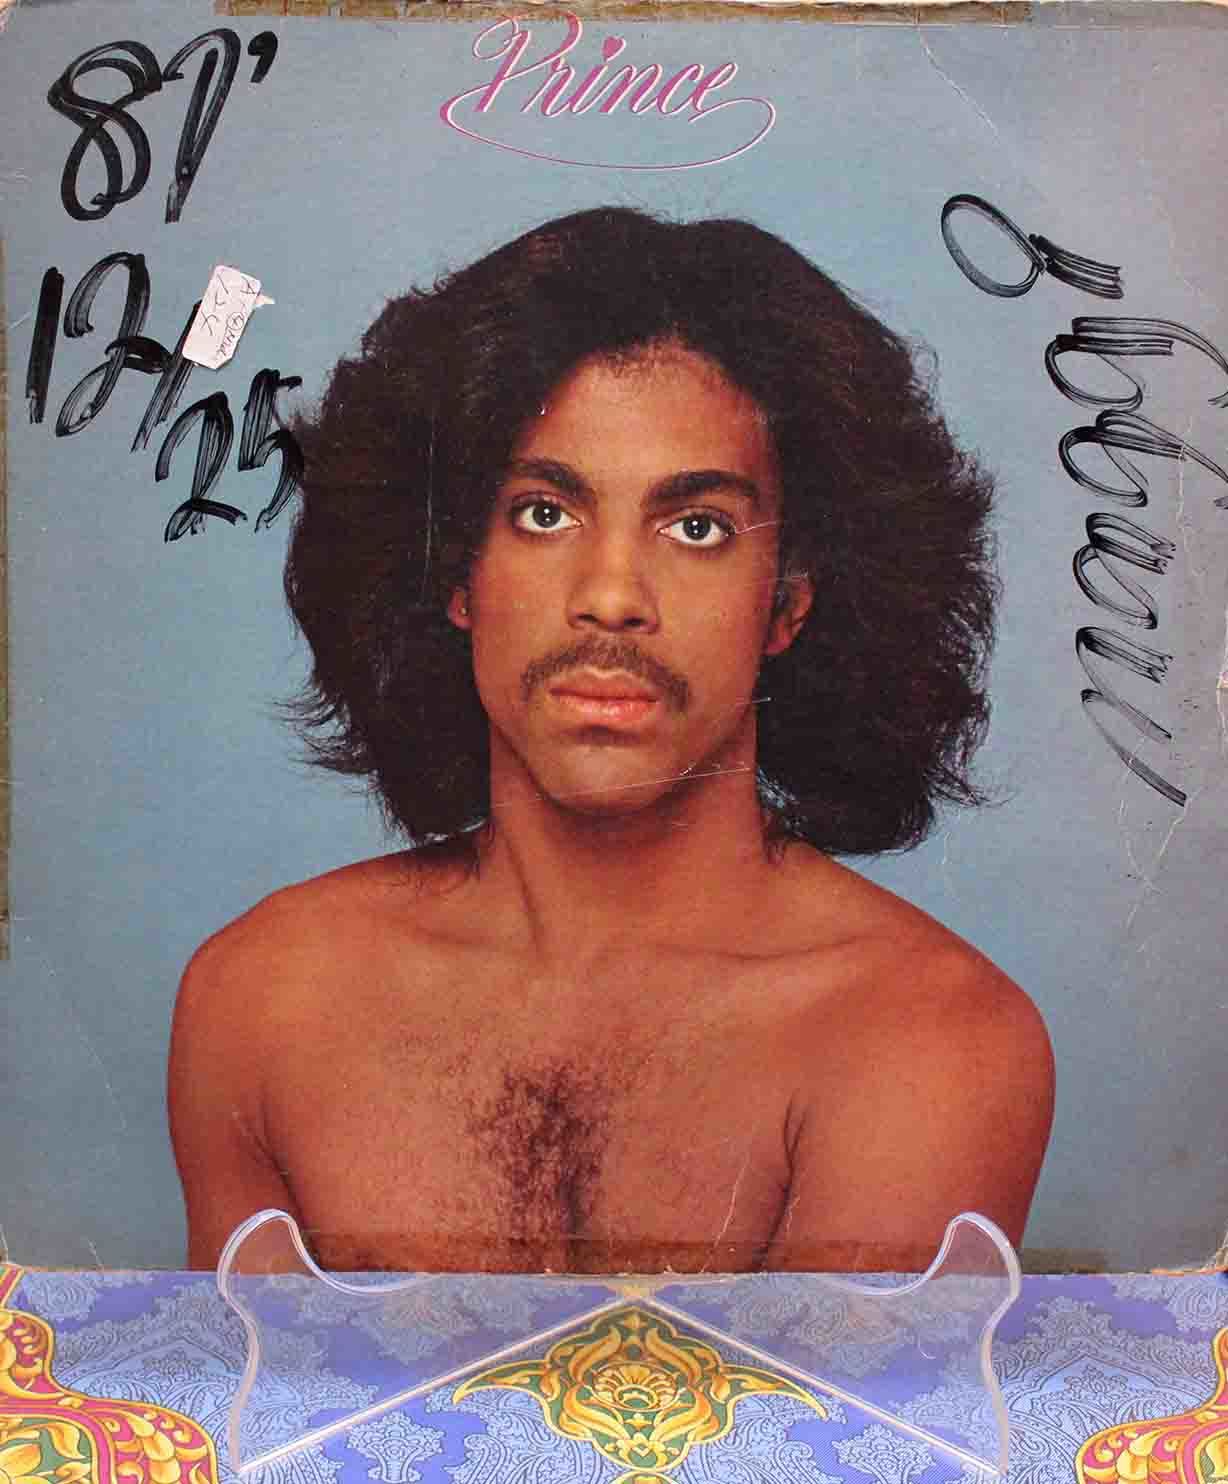 Prince - I Wanna Be Your Lover LP 01